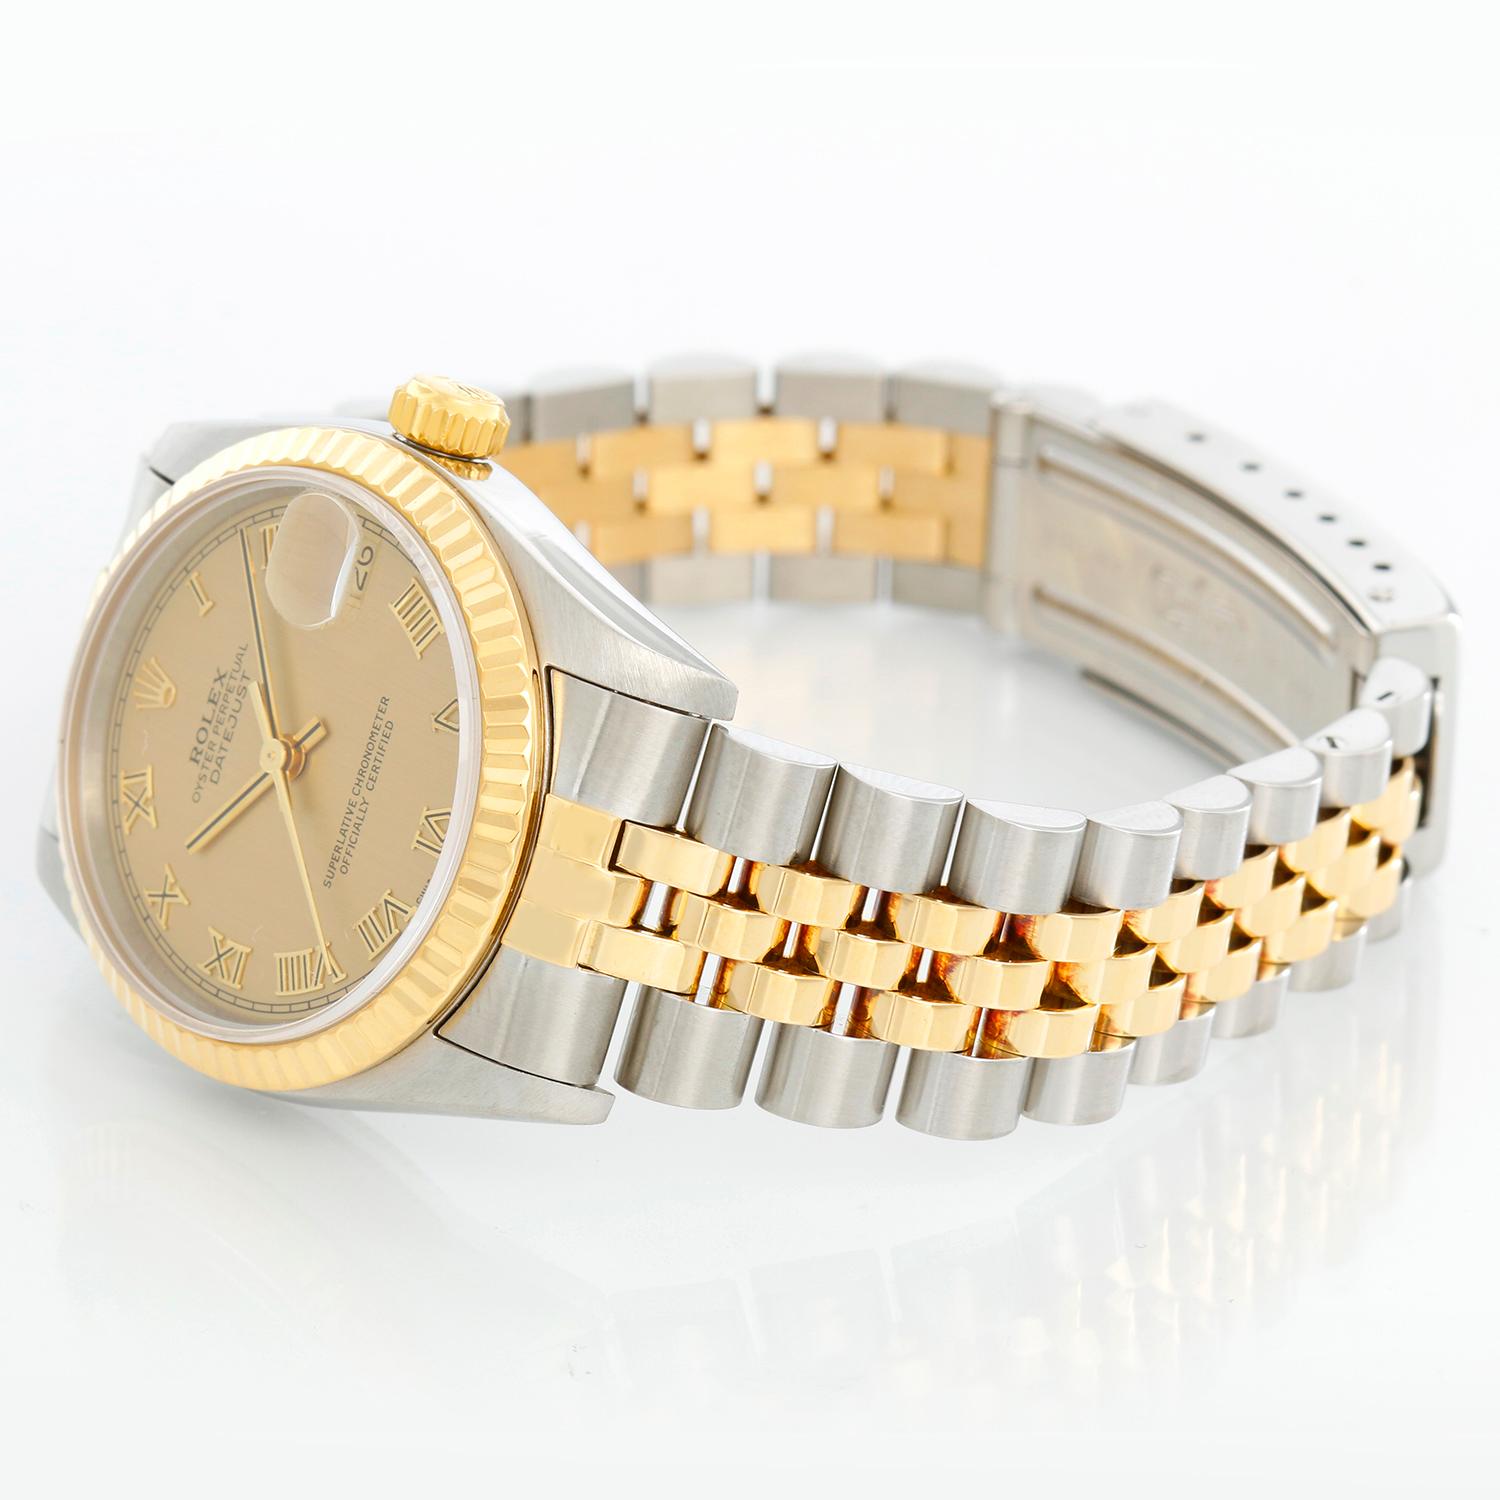 Rolex Datejust Midsize 2-Tone Watch 68273 - Automatic winding, 29 jewels, Quickset, sapphire crystal.  Stainless steel case with 18k yellow gold  fluted bezel. Champagne dial with roman numerals. Stainless steel and 18k yellow gold Oyster bracelet.